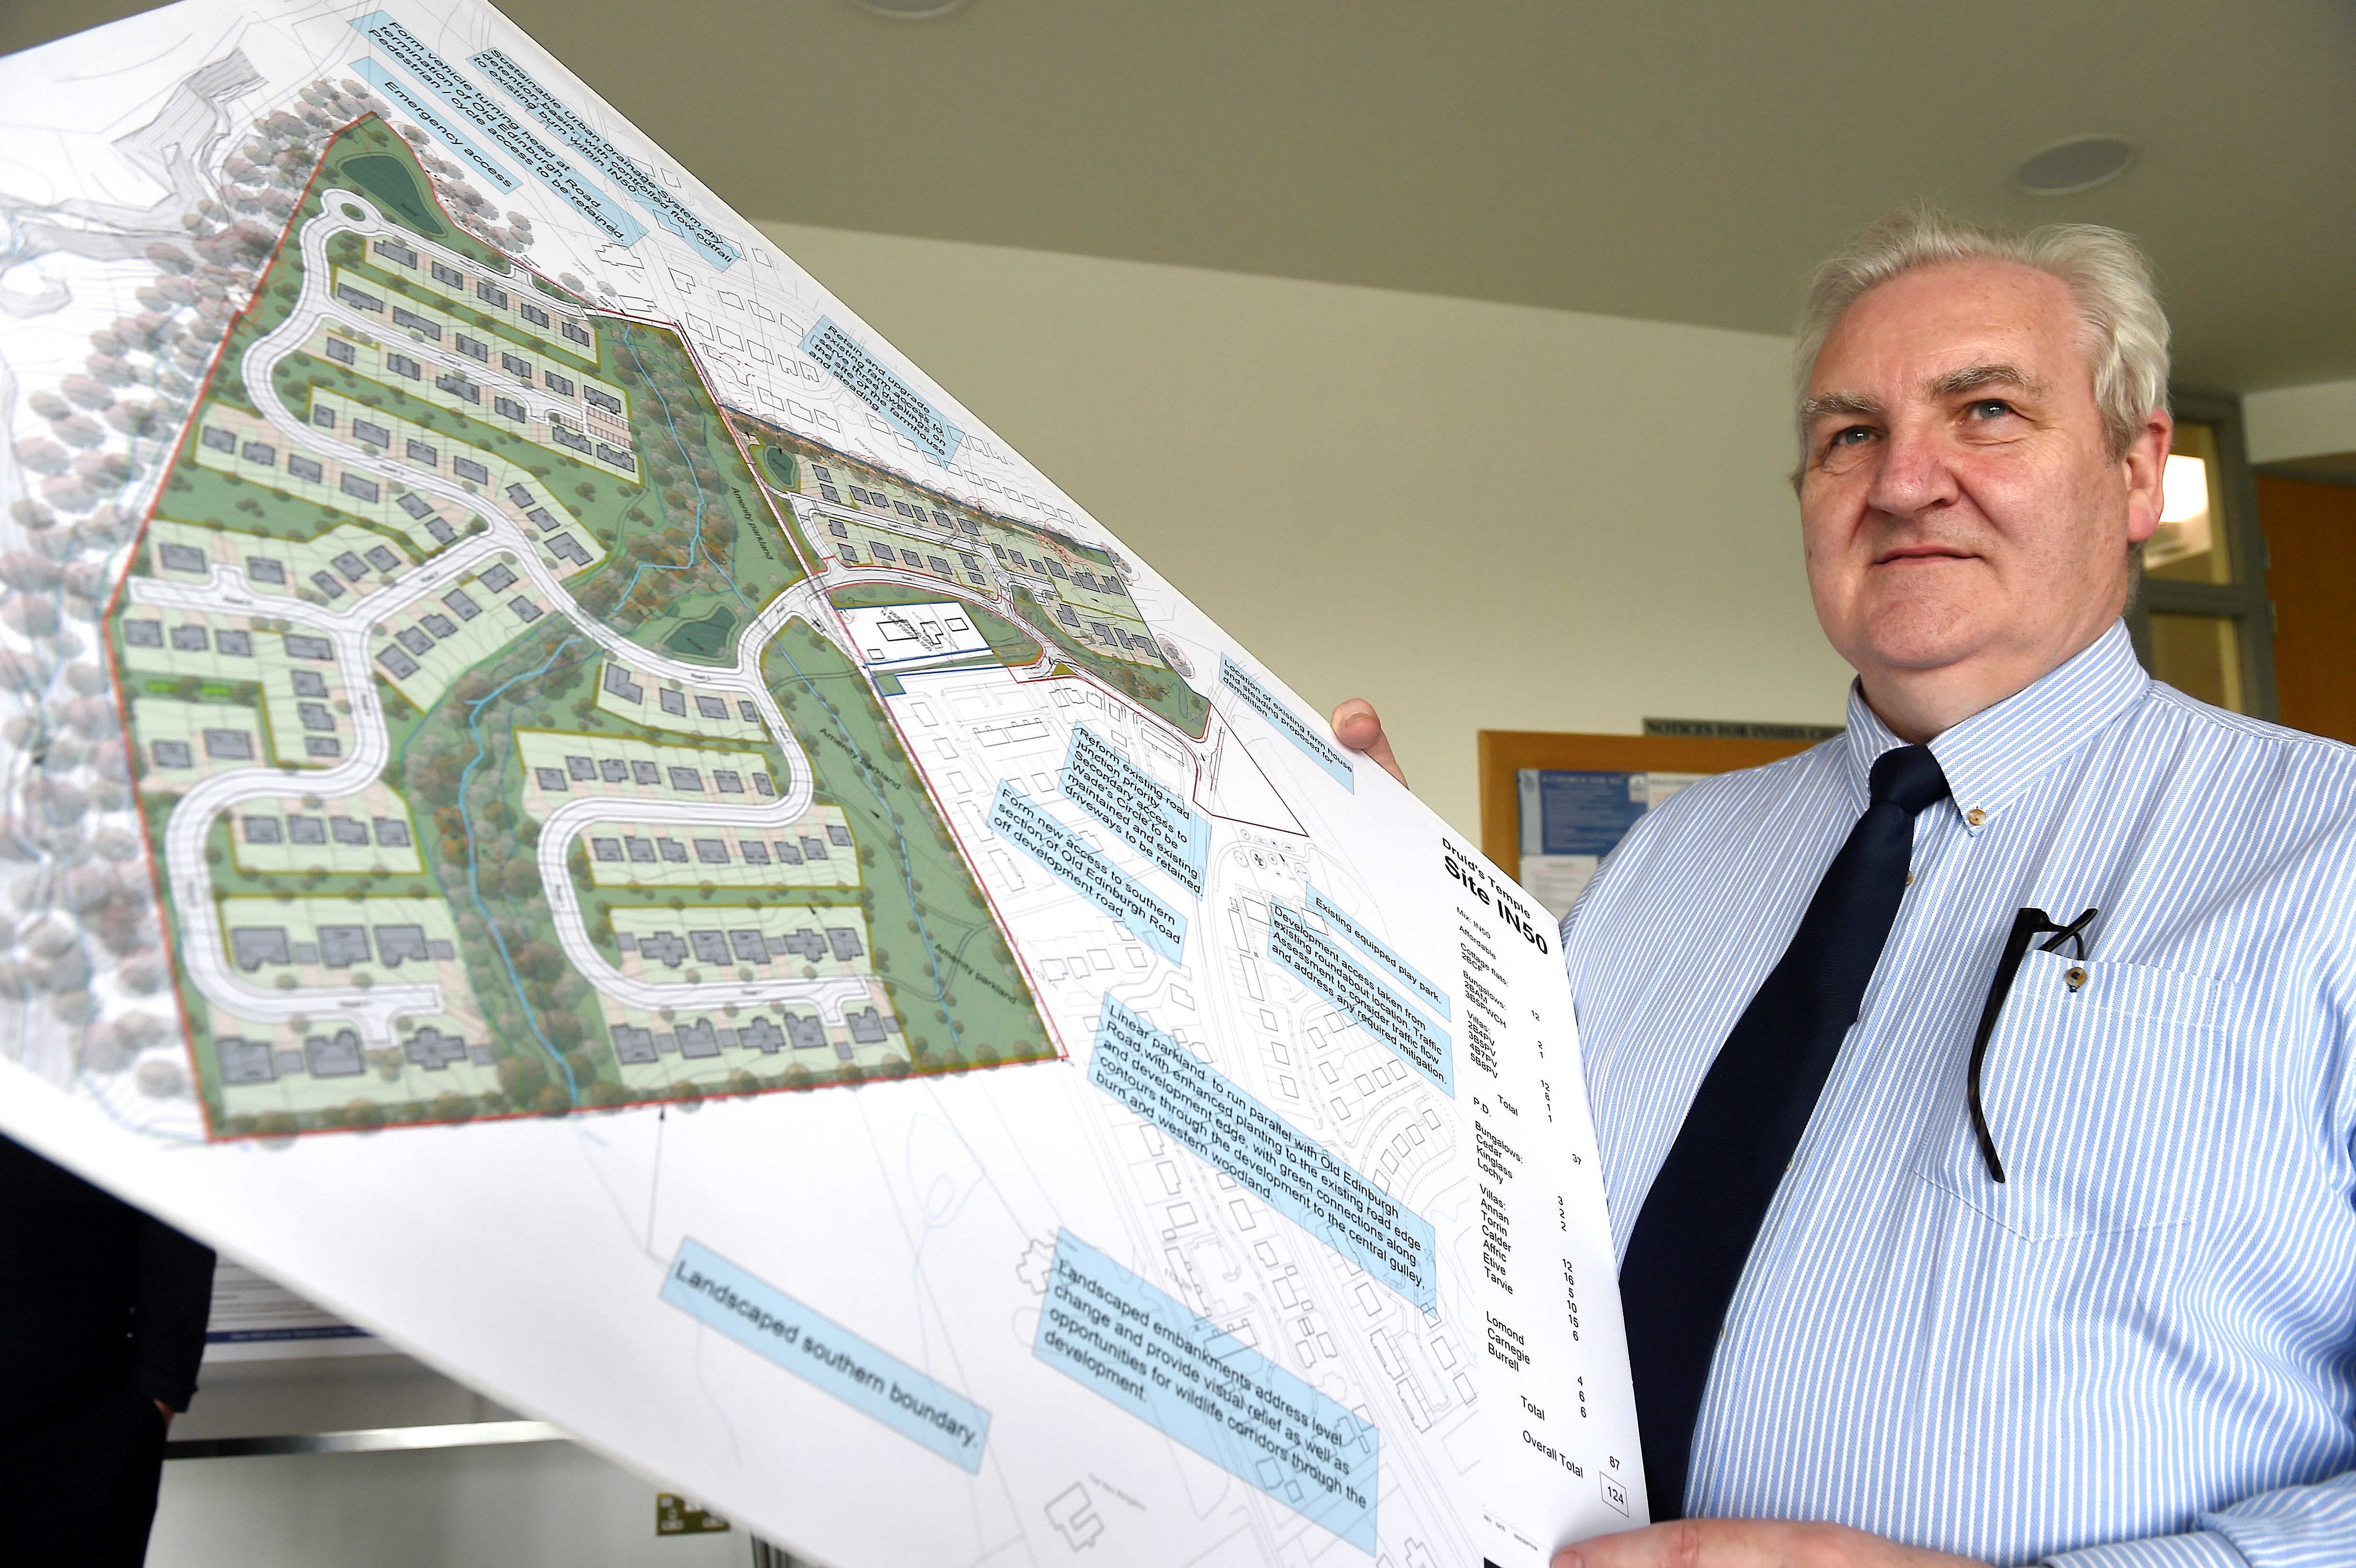 Architect Sam Sweeney holds aloft plans after a public consultation was held yesterday over a potential housing development at Old Edinburgh Road South, Inverness.